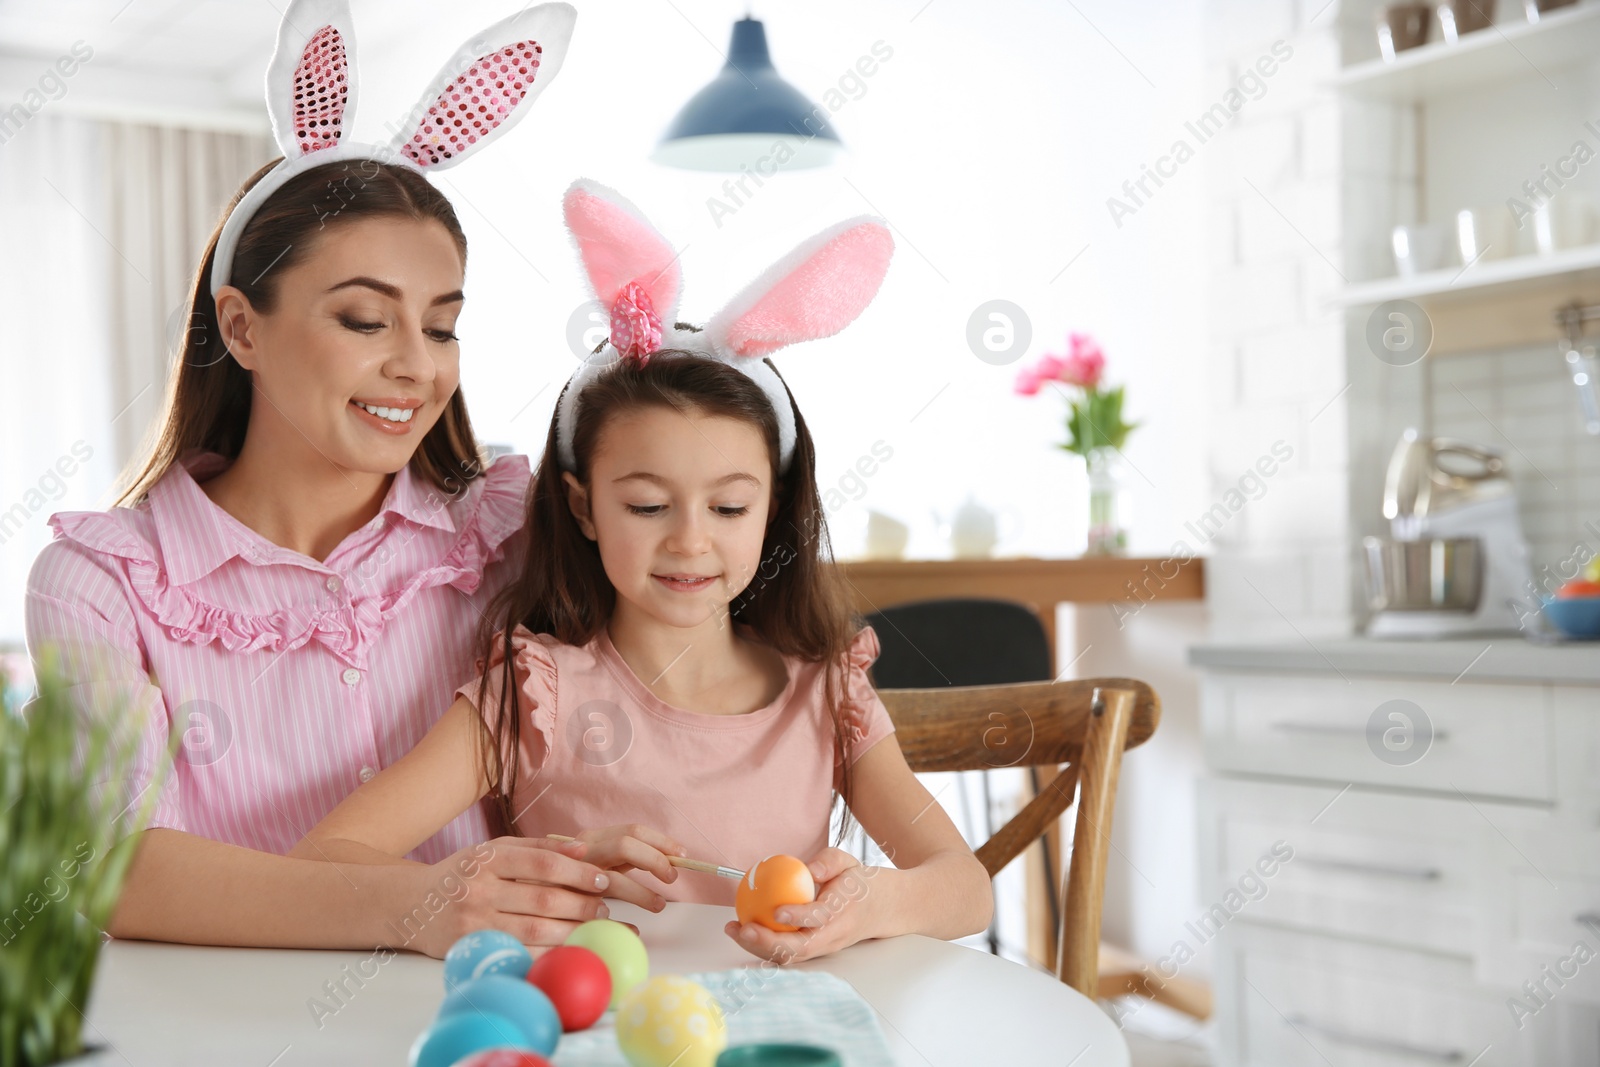 Photo of Mother and daughter with bunny ears headbands painting Easter eggs in kitchen, space for text